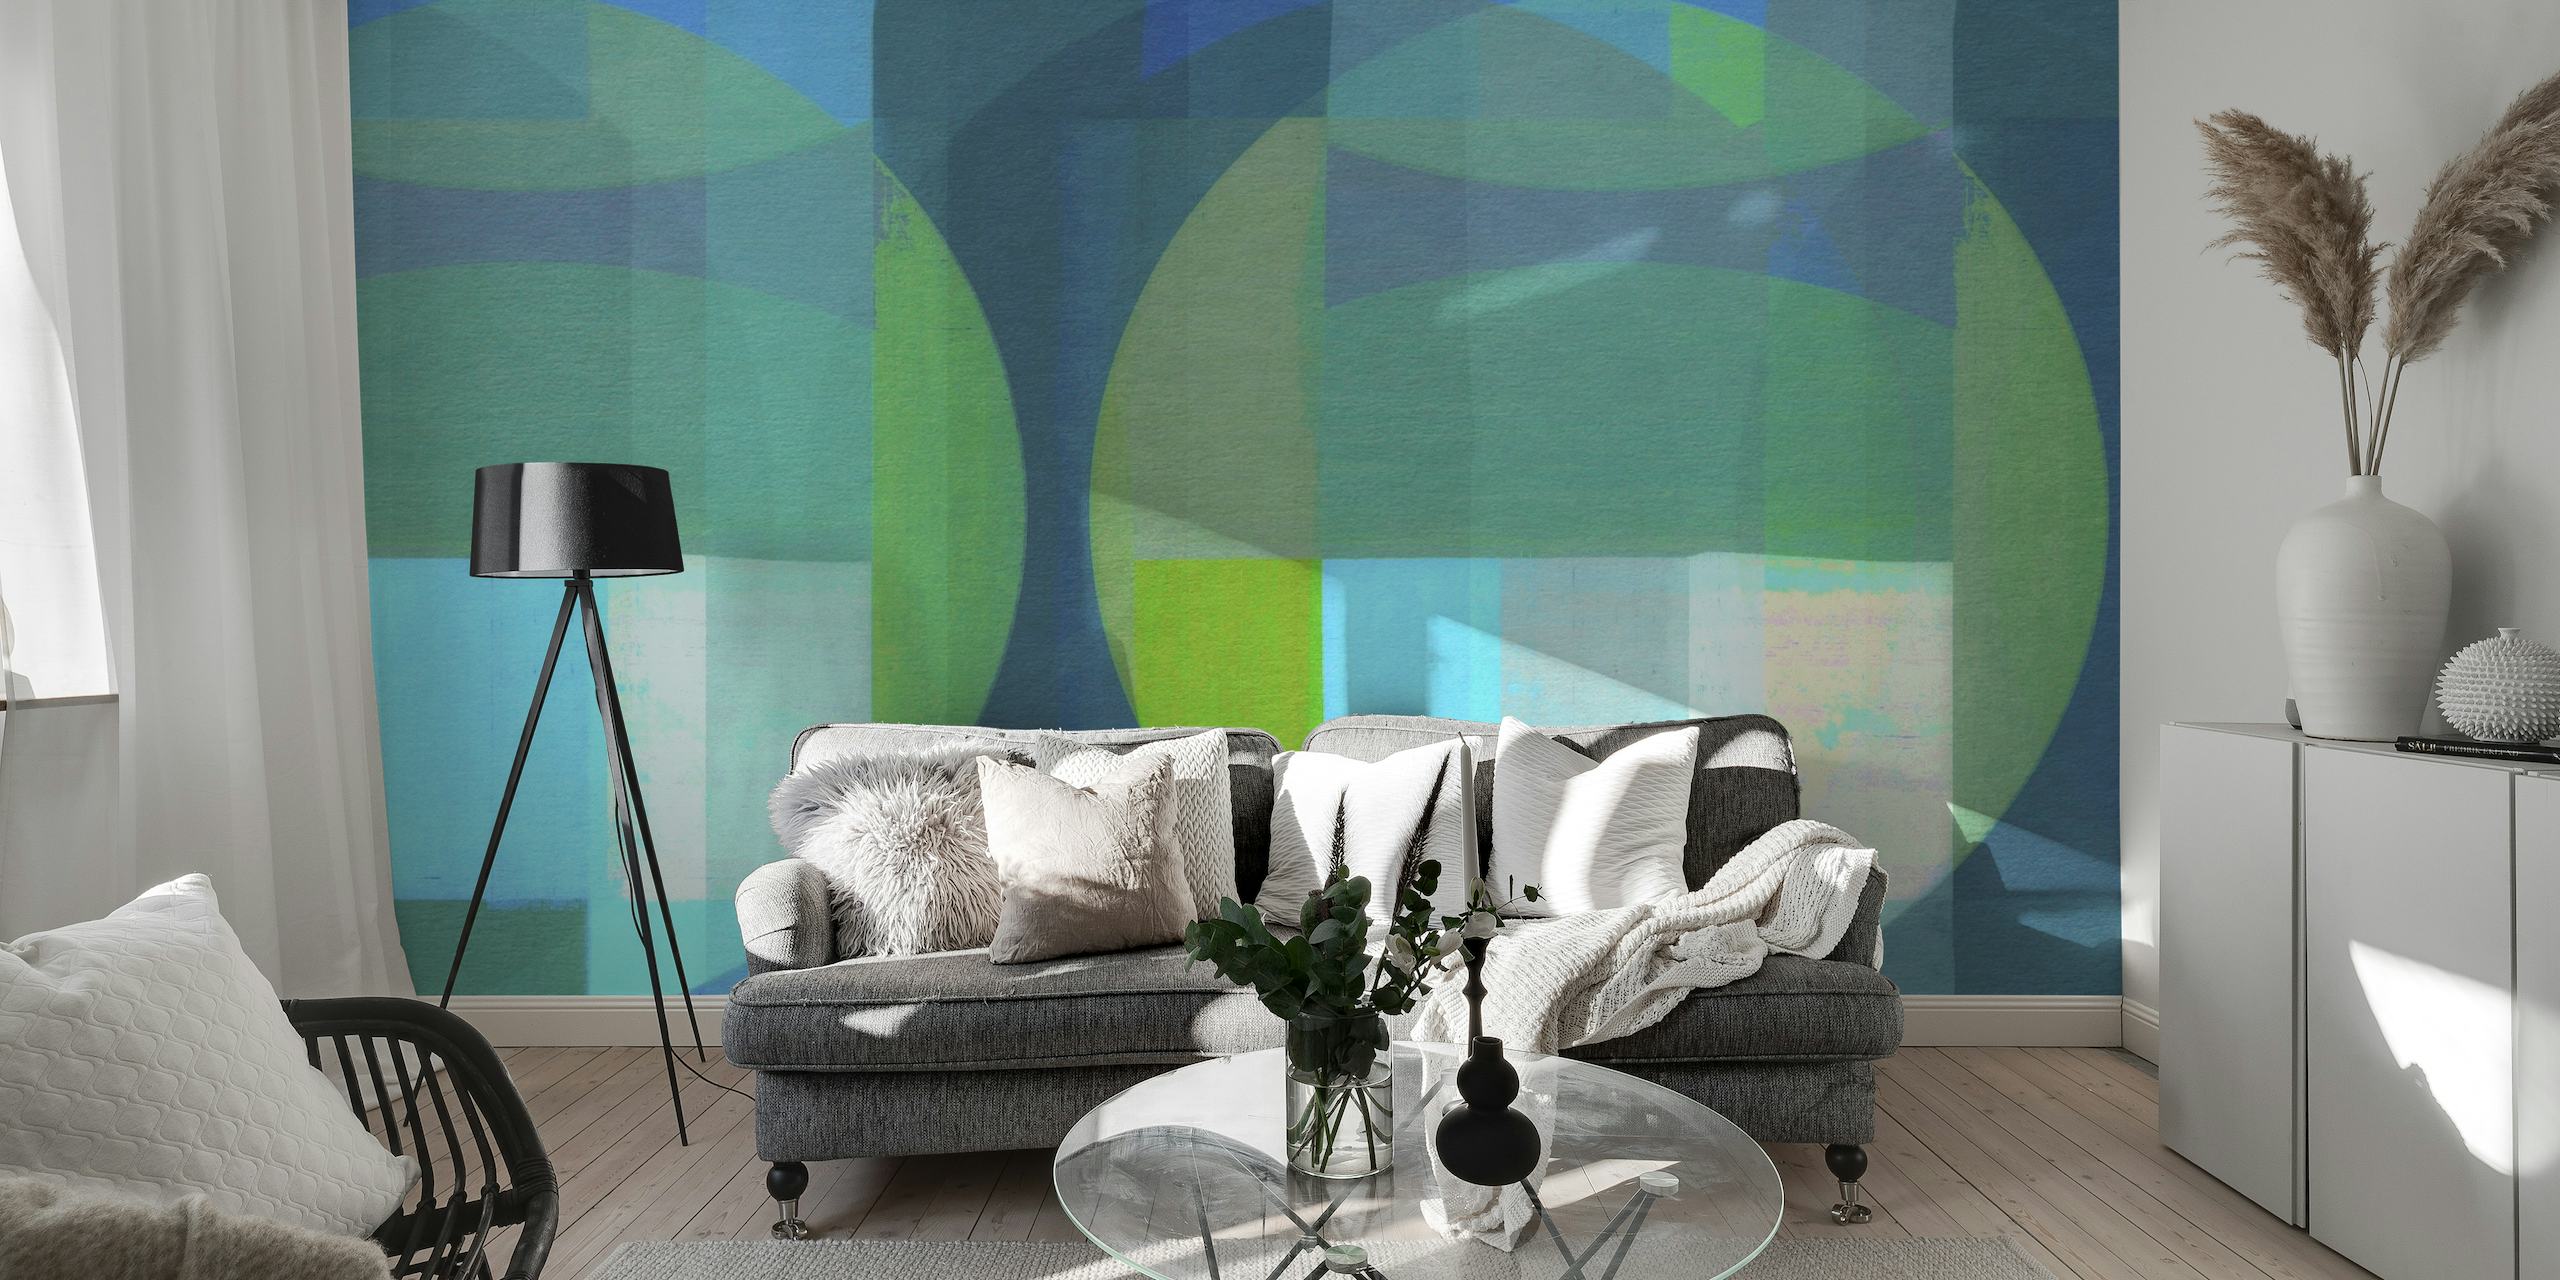 Teal and green abstract mid-century modern style wall mural